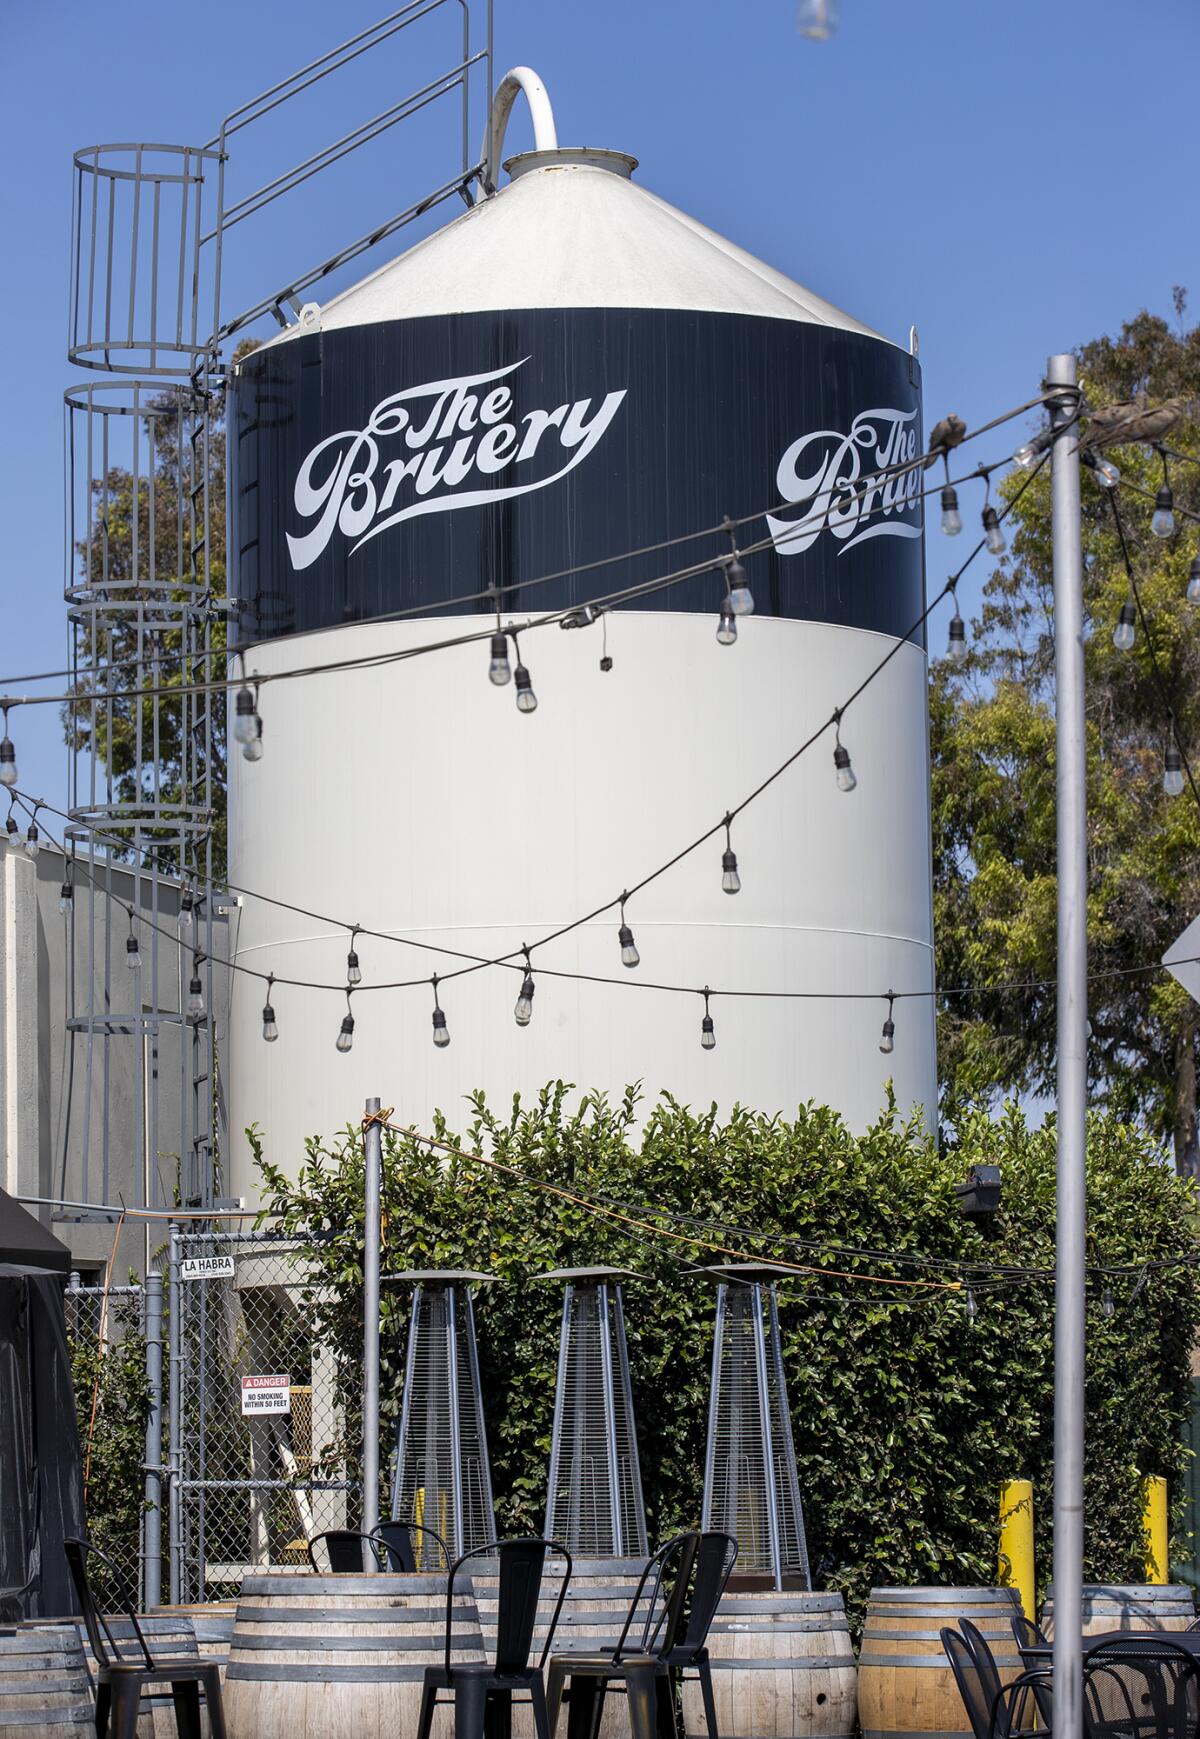 The working grain silo outside at the Bruery in Placentia.